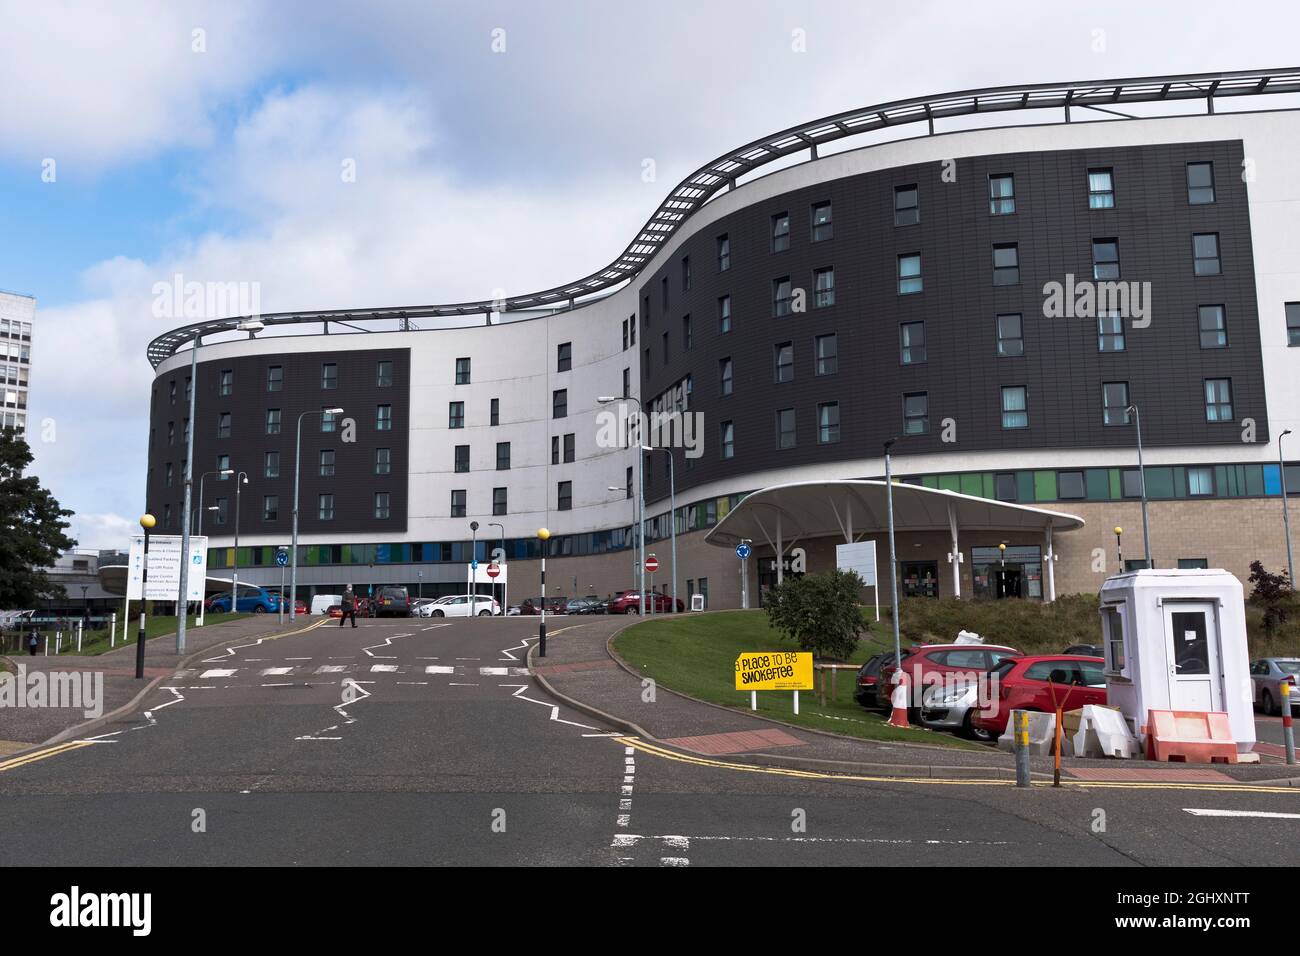 dh Victoria hospital KIRKCALDY FIFE Scottish Entrance to NHS hospitals building Scotland modern architecture Stock Photo